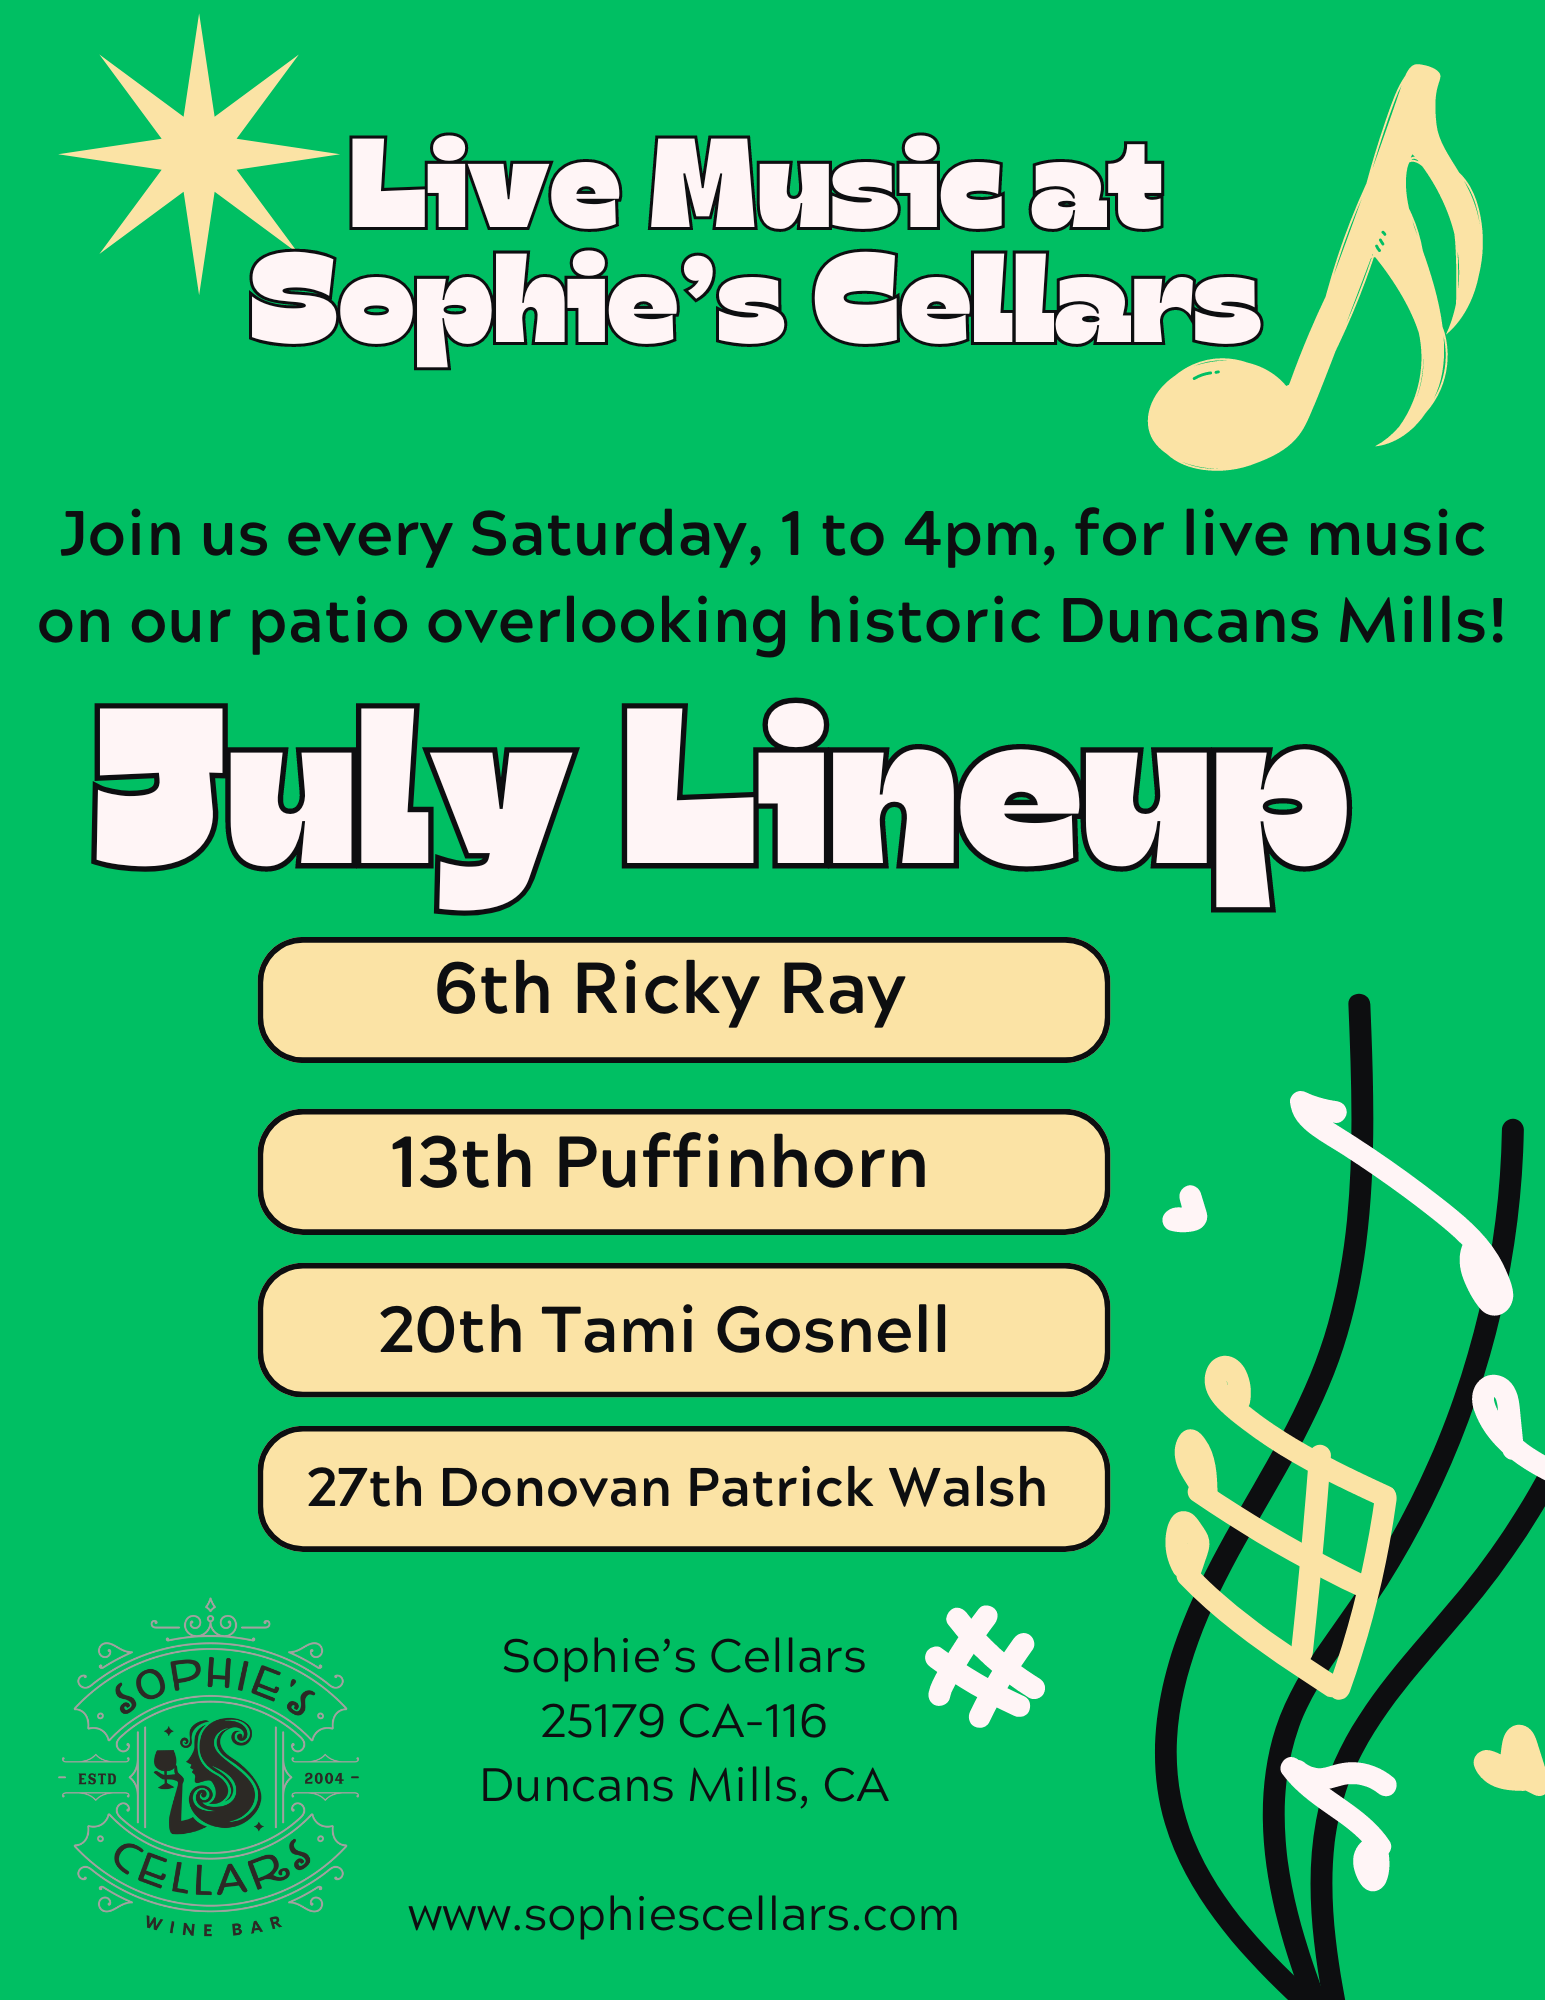 Event: Live Music at Sophie's Cellars with Donovan Patrick Walsh